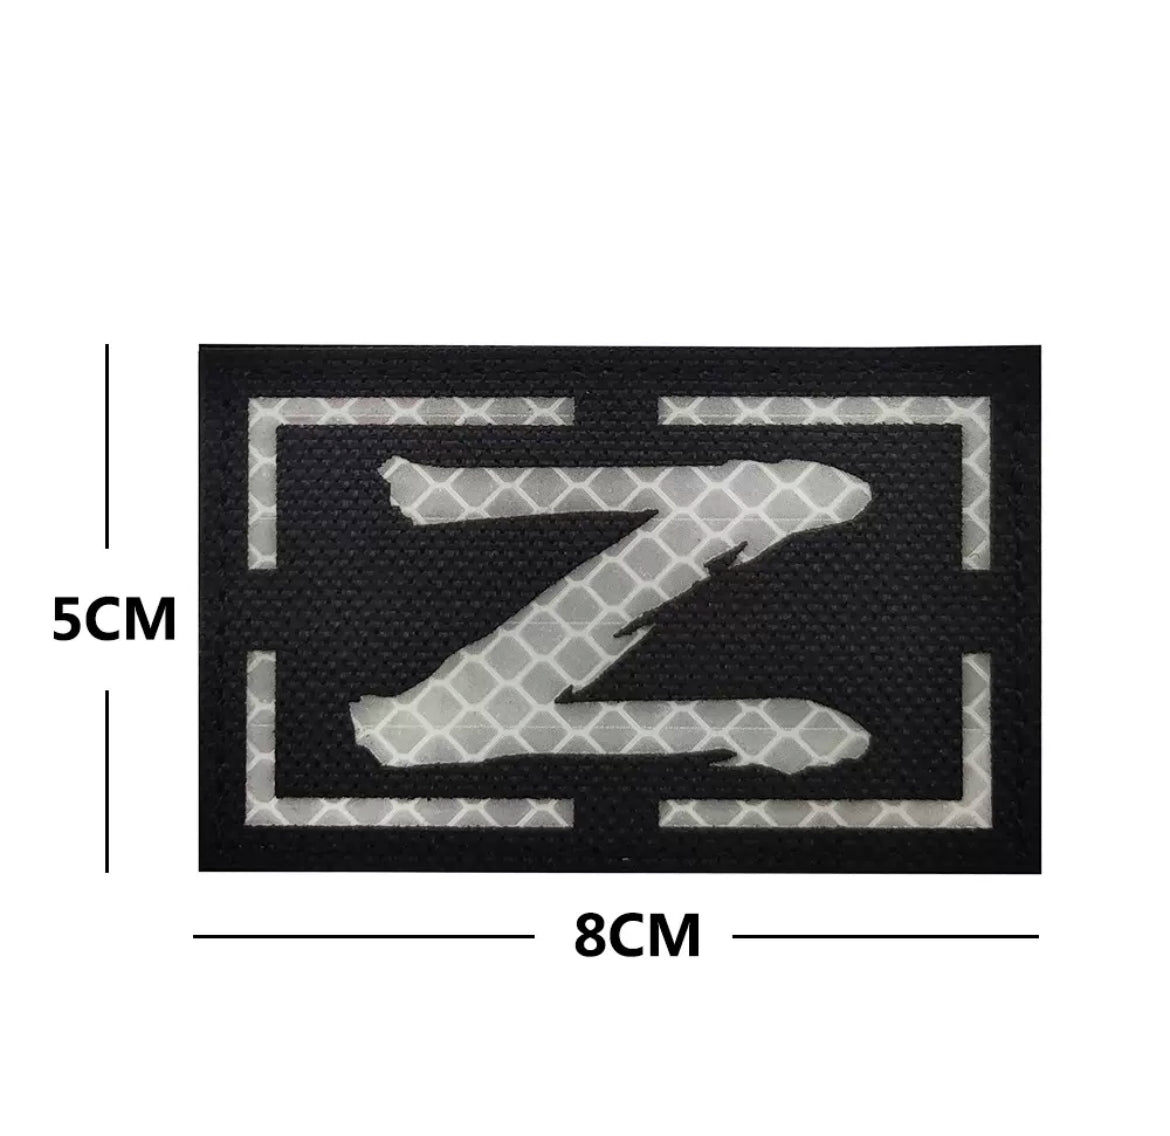 Russian Military Z-shaped V-shaped reflective fabric laser-cut armband Velcro patch